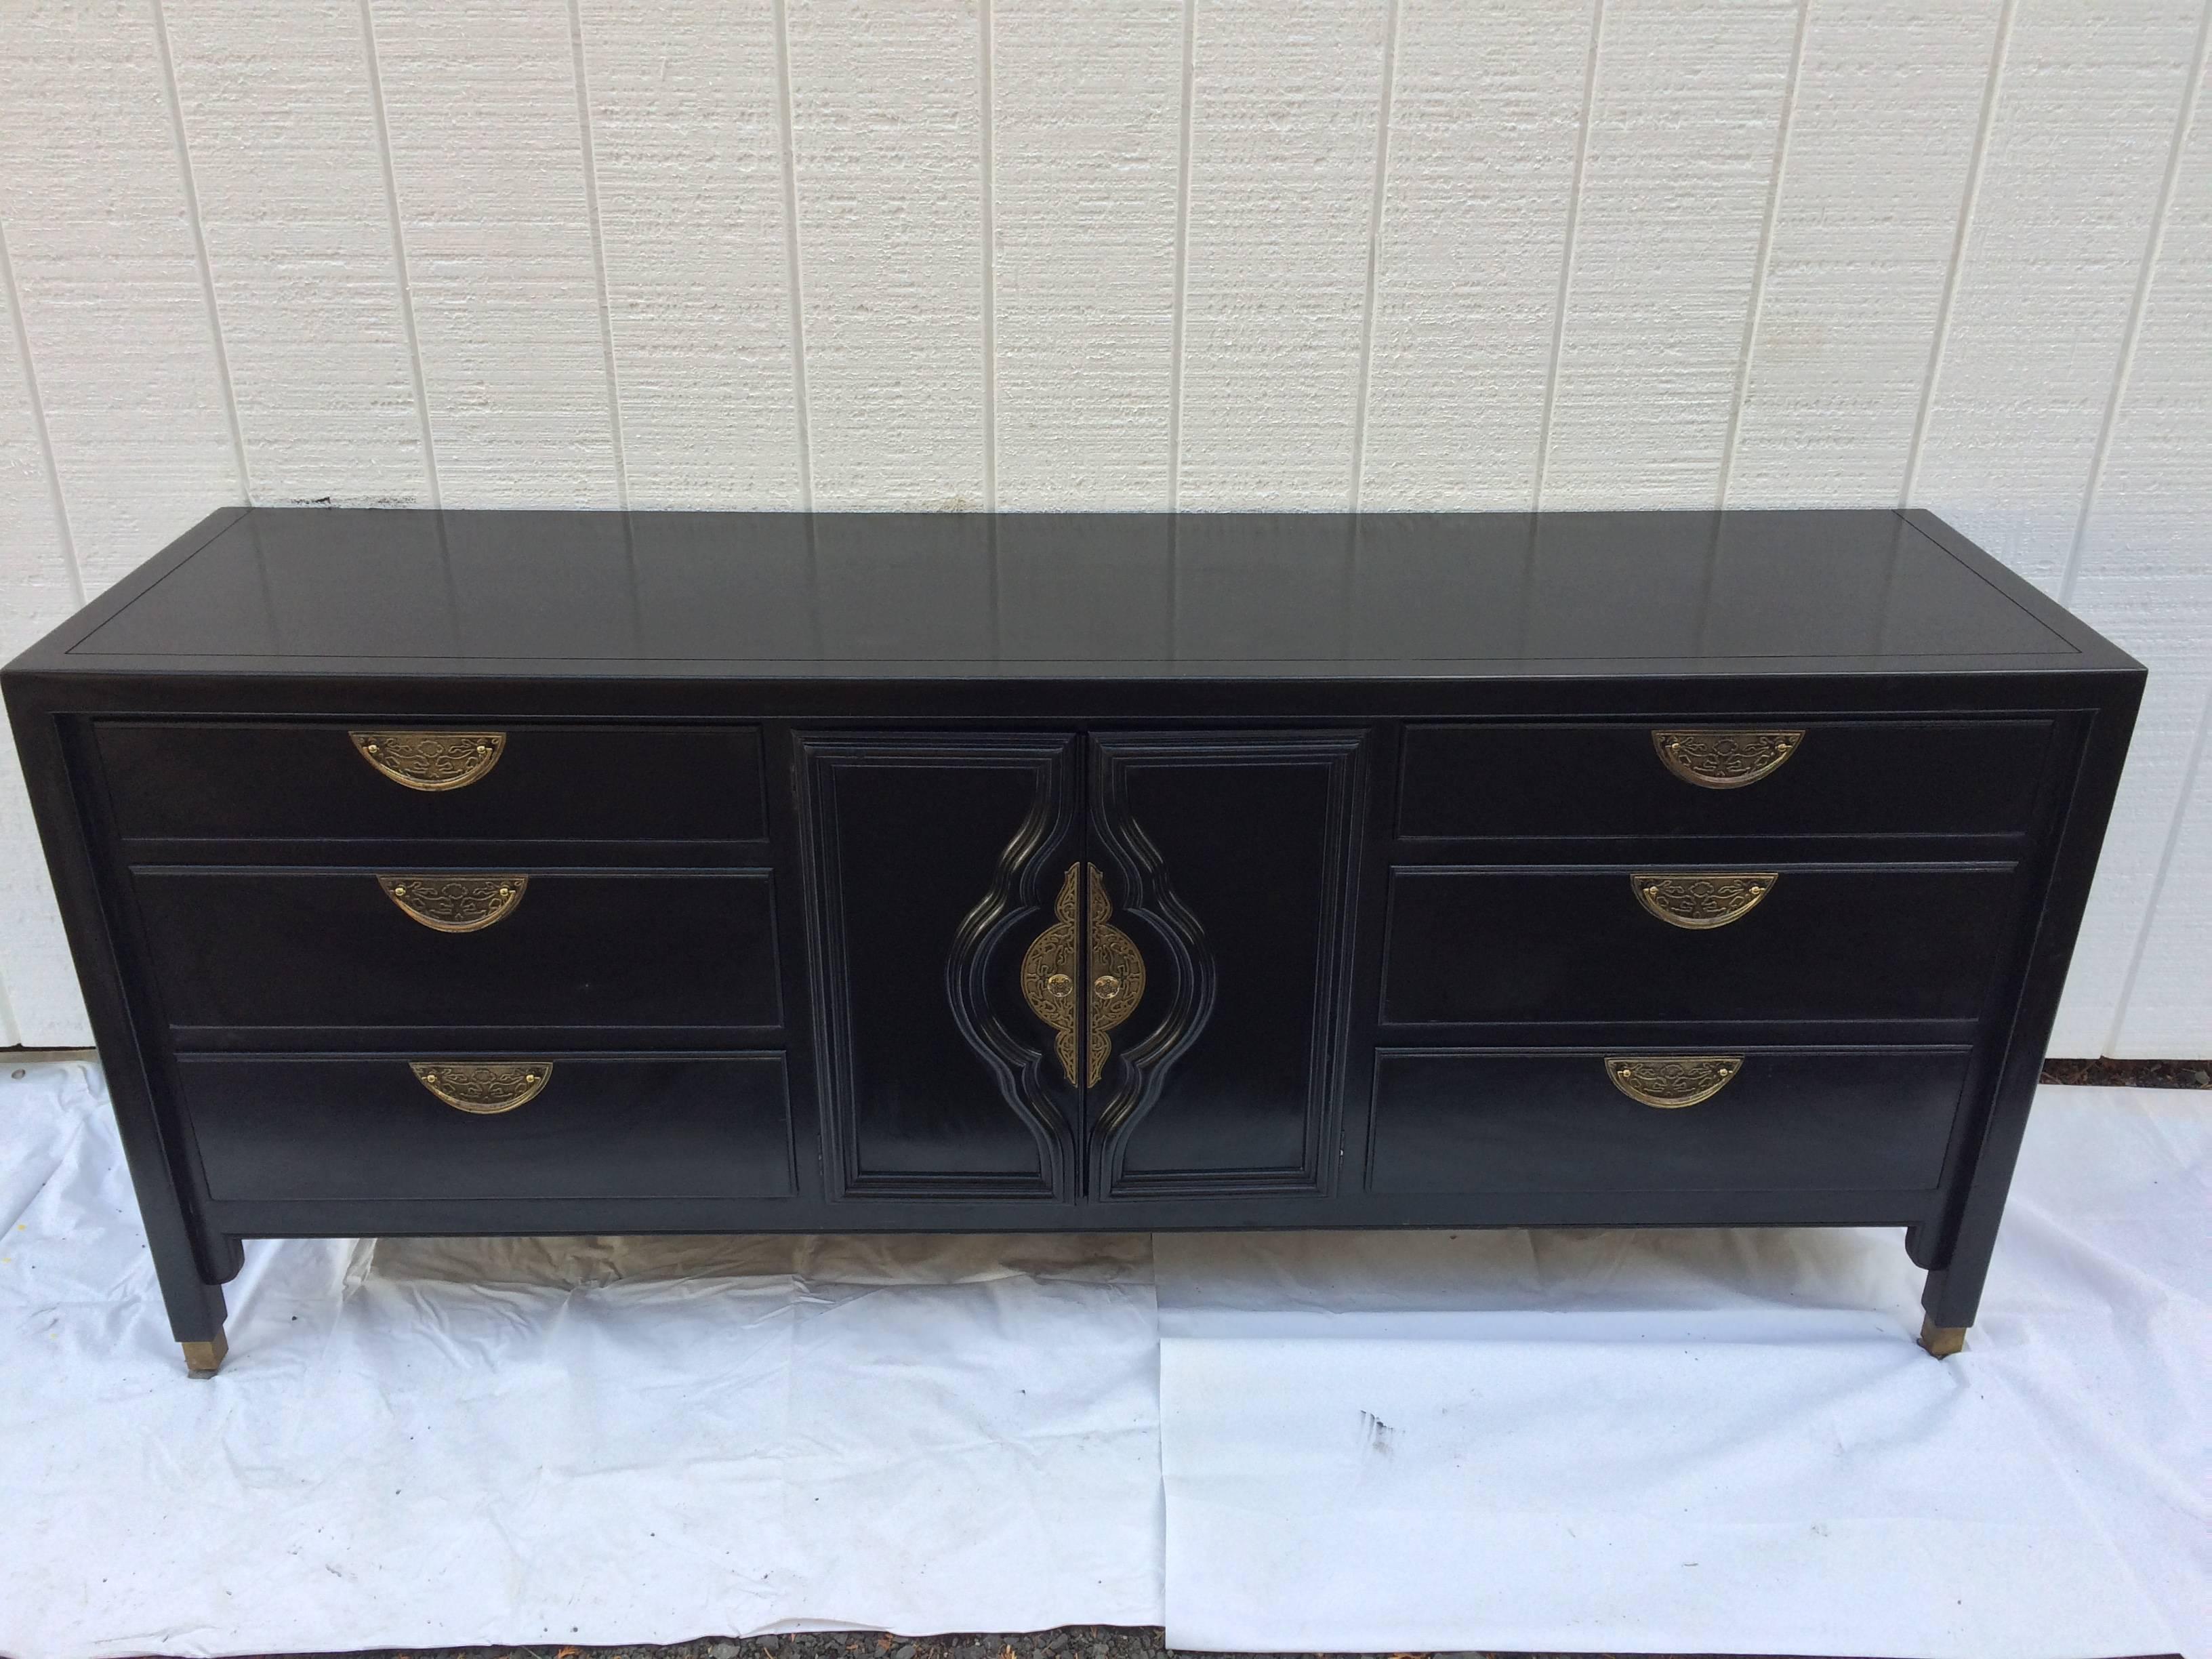 Hollywood Regency dresser in the style of James Mont for Century. Moroccan style etched brass hardware. Lots of storage to this nine drawer wooden black beauty. Gorgeous brass pulls make up this classic piece. Use as a credenza or a dresser. Great